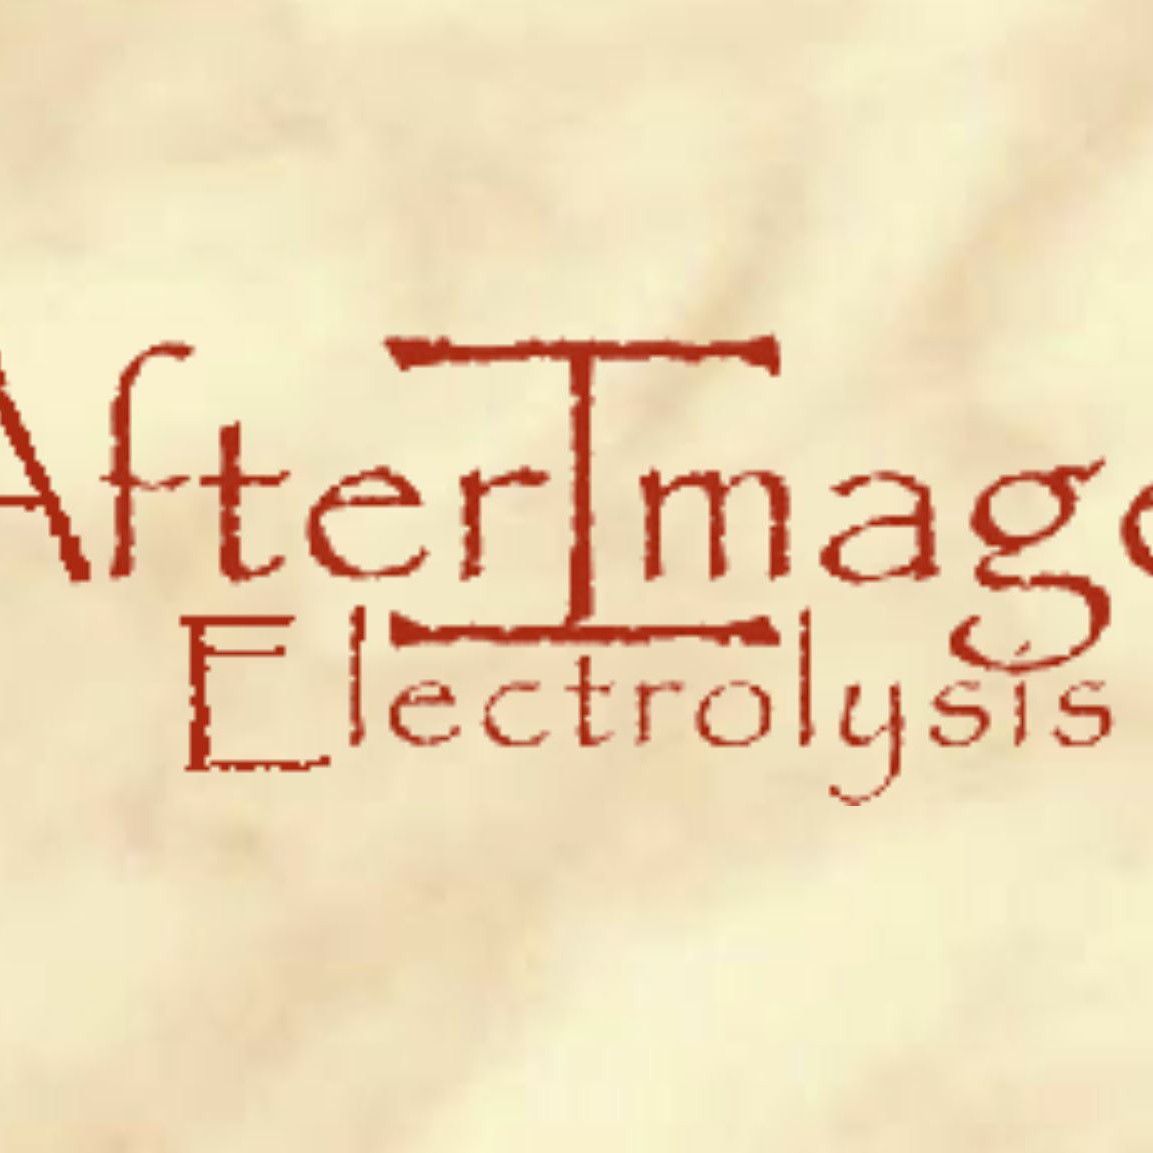 AfterImage Electrolysis, 838 Peruville Road, Groton, 13073